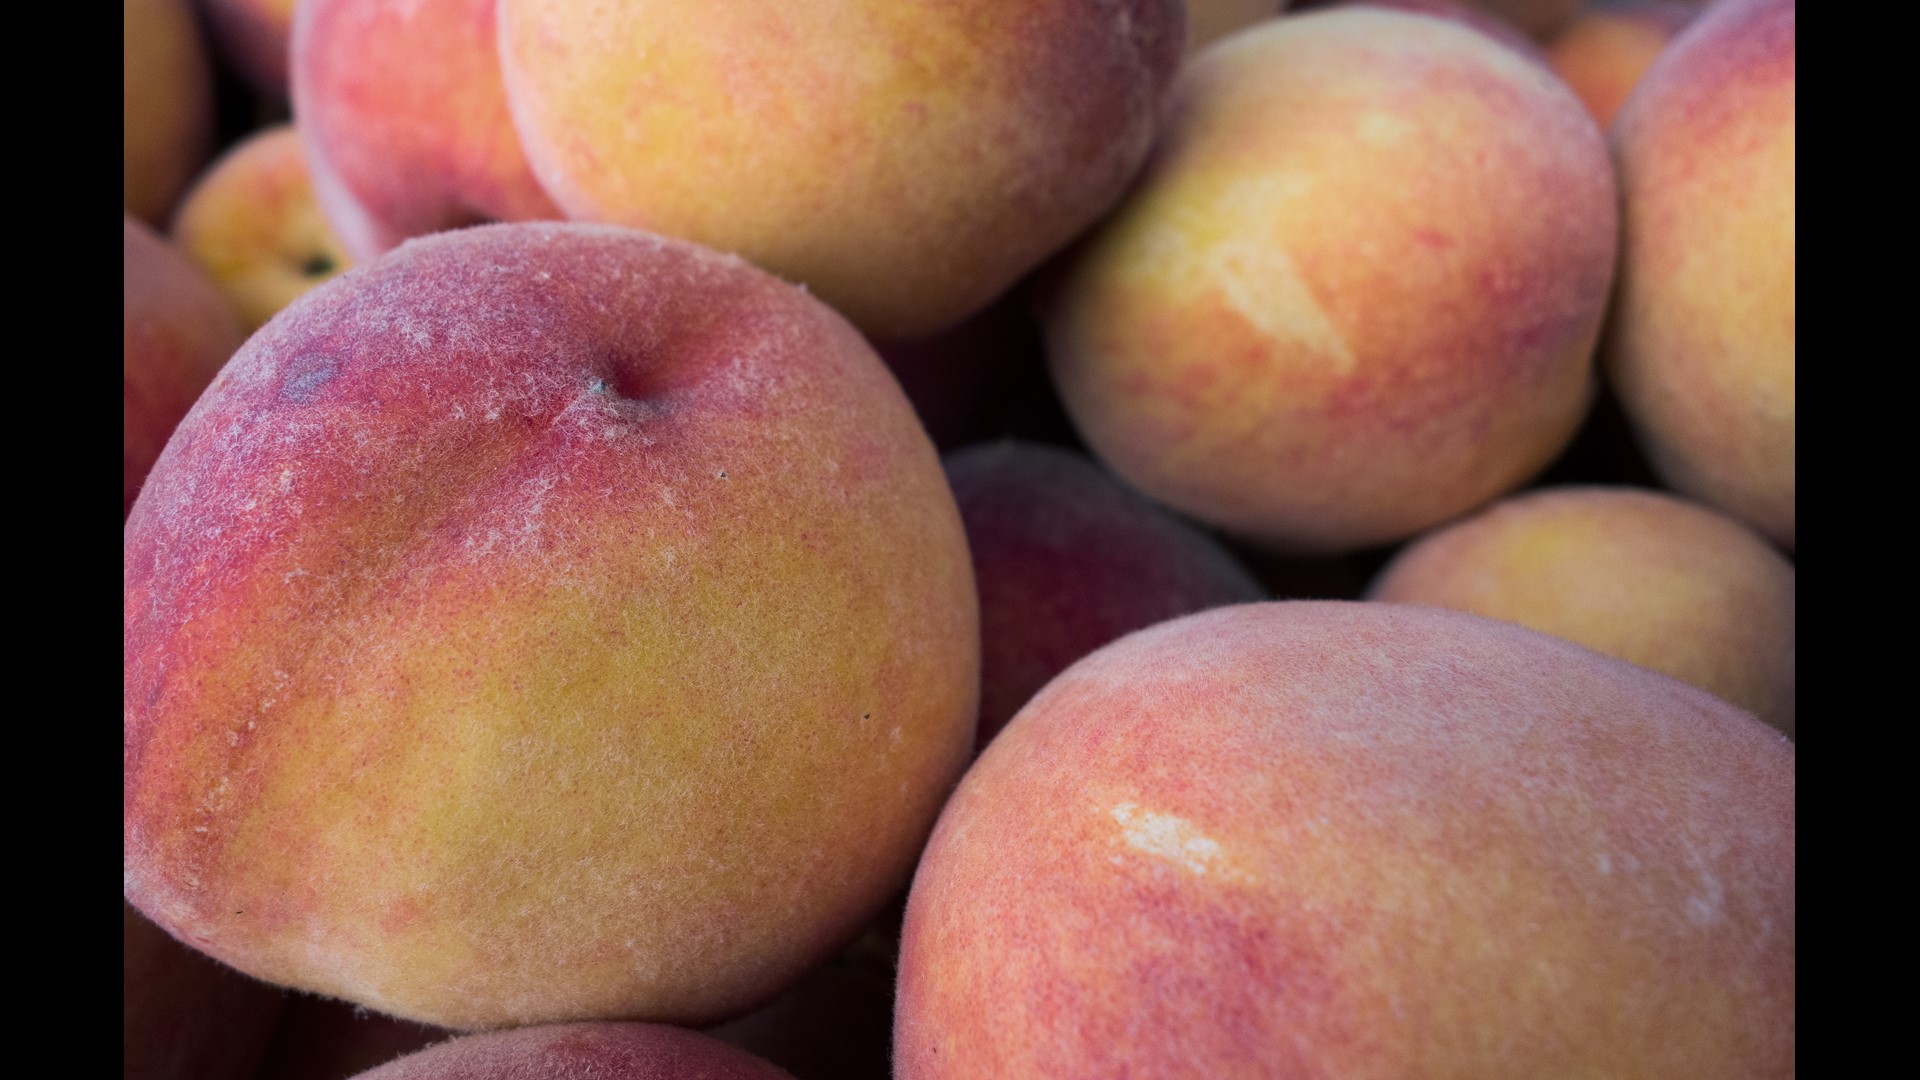 Company expands voluntary fruit recall